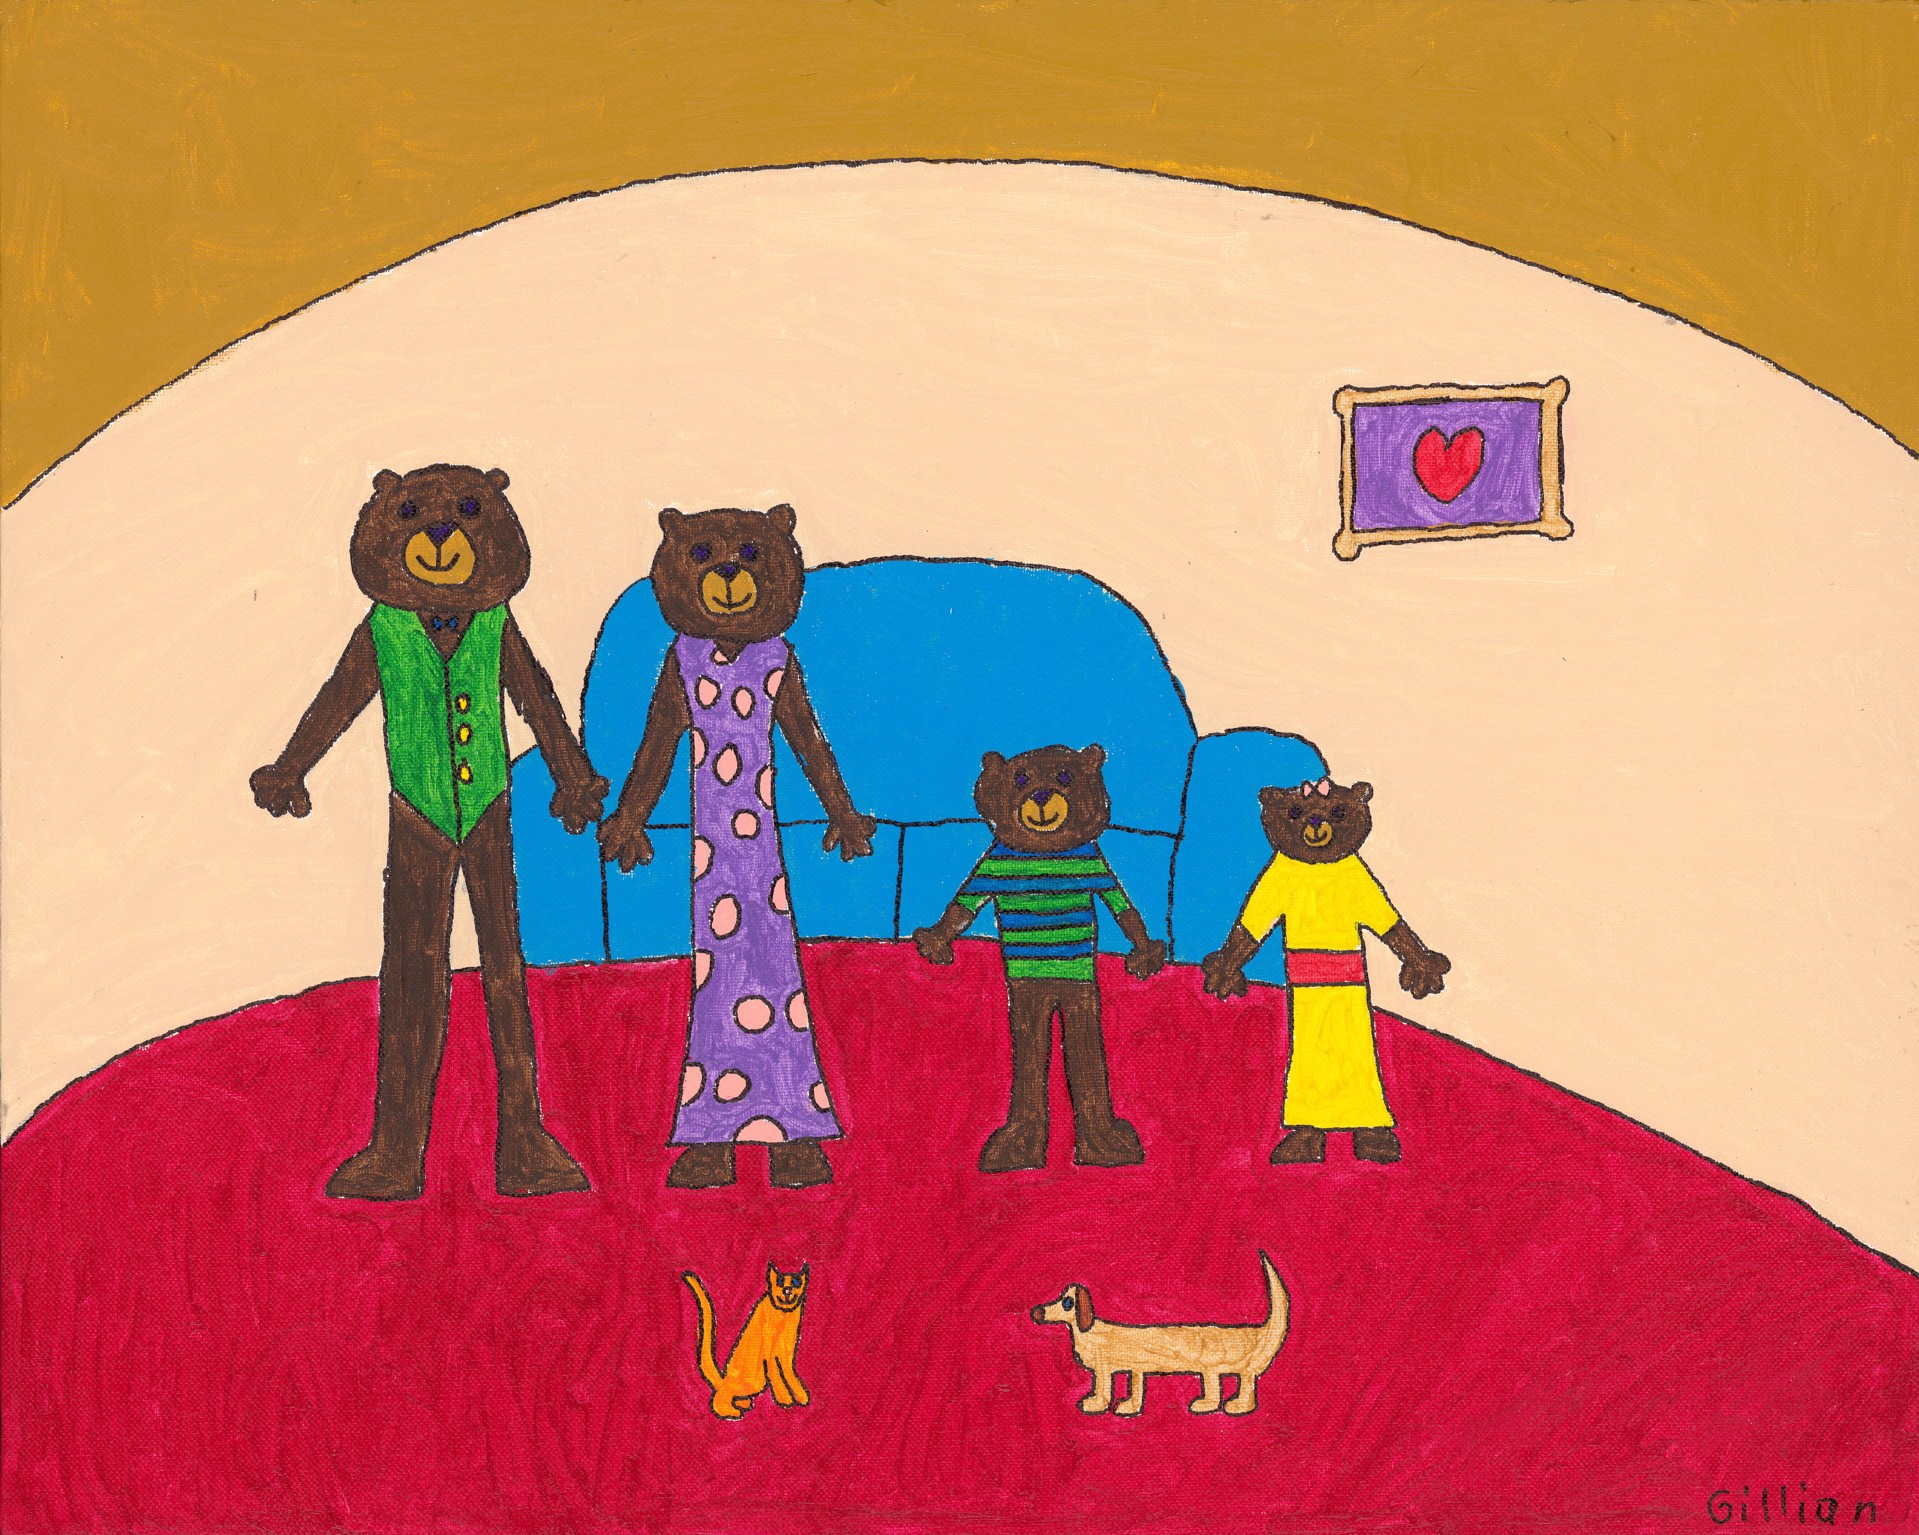 The Friendly Bear Family by Gillian Patterson